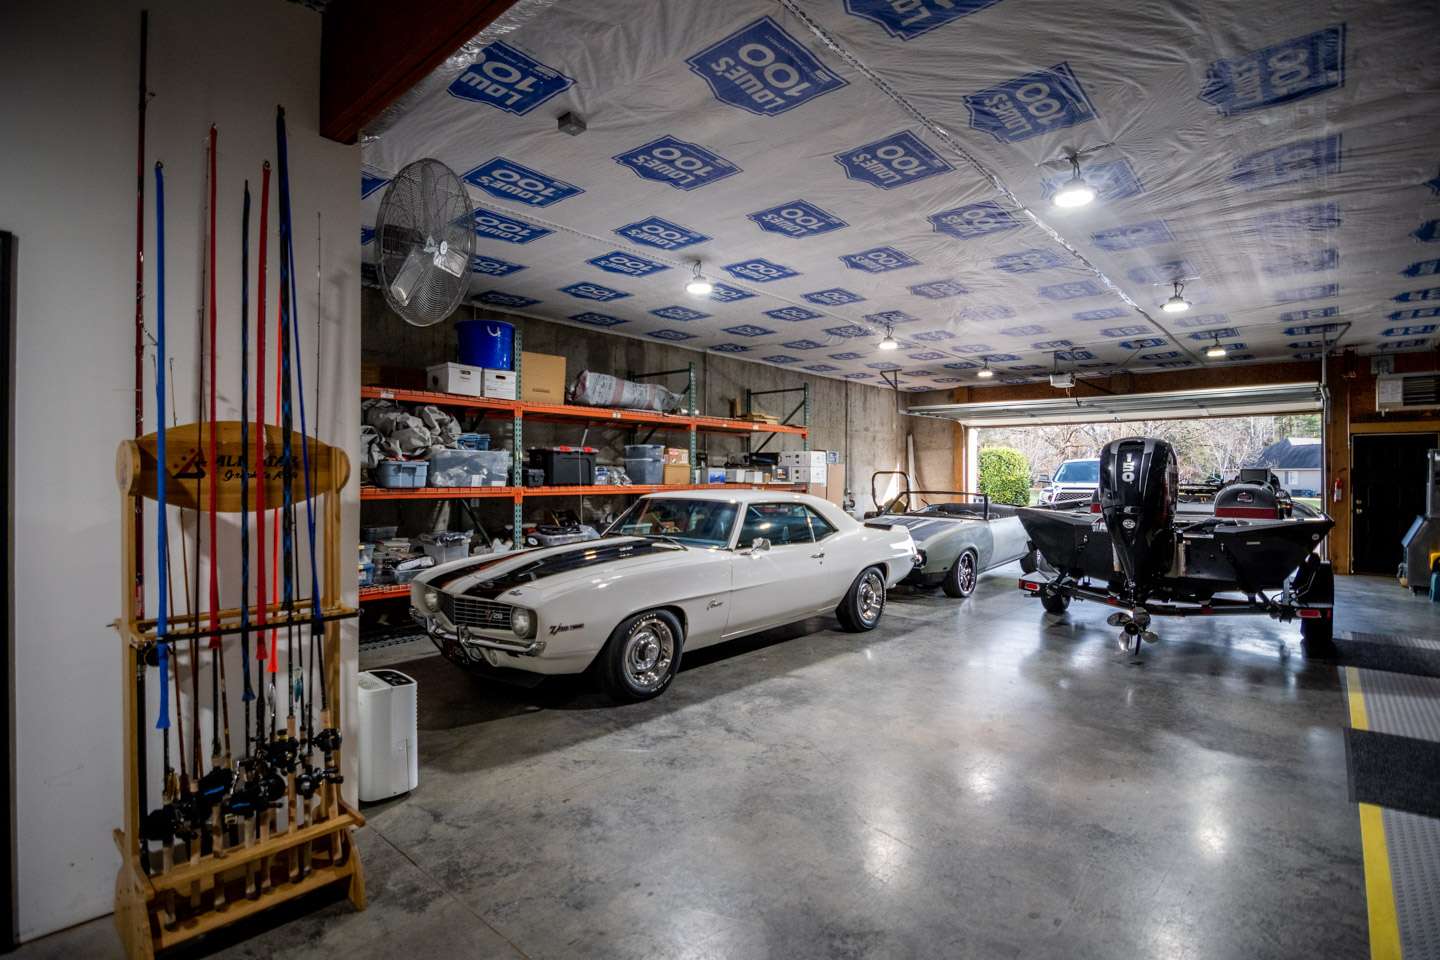 Upon the first glance, the spacious garage is home to a familiar sight. That is Auten’s RT198 rig used mostly for fun fishing. There is also more eye candy to behold. 